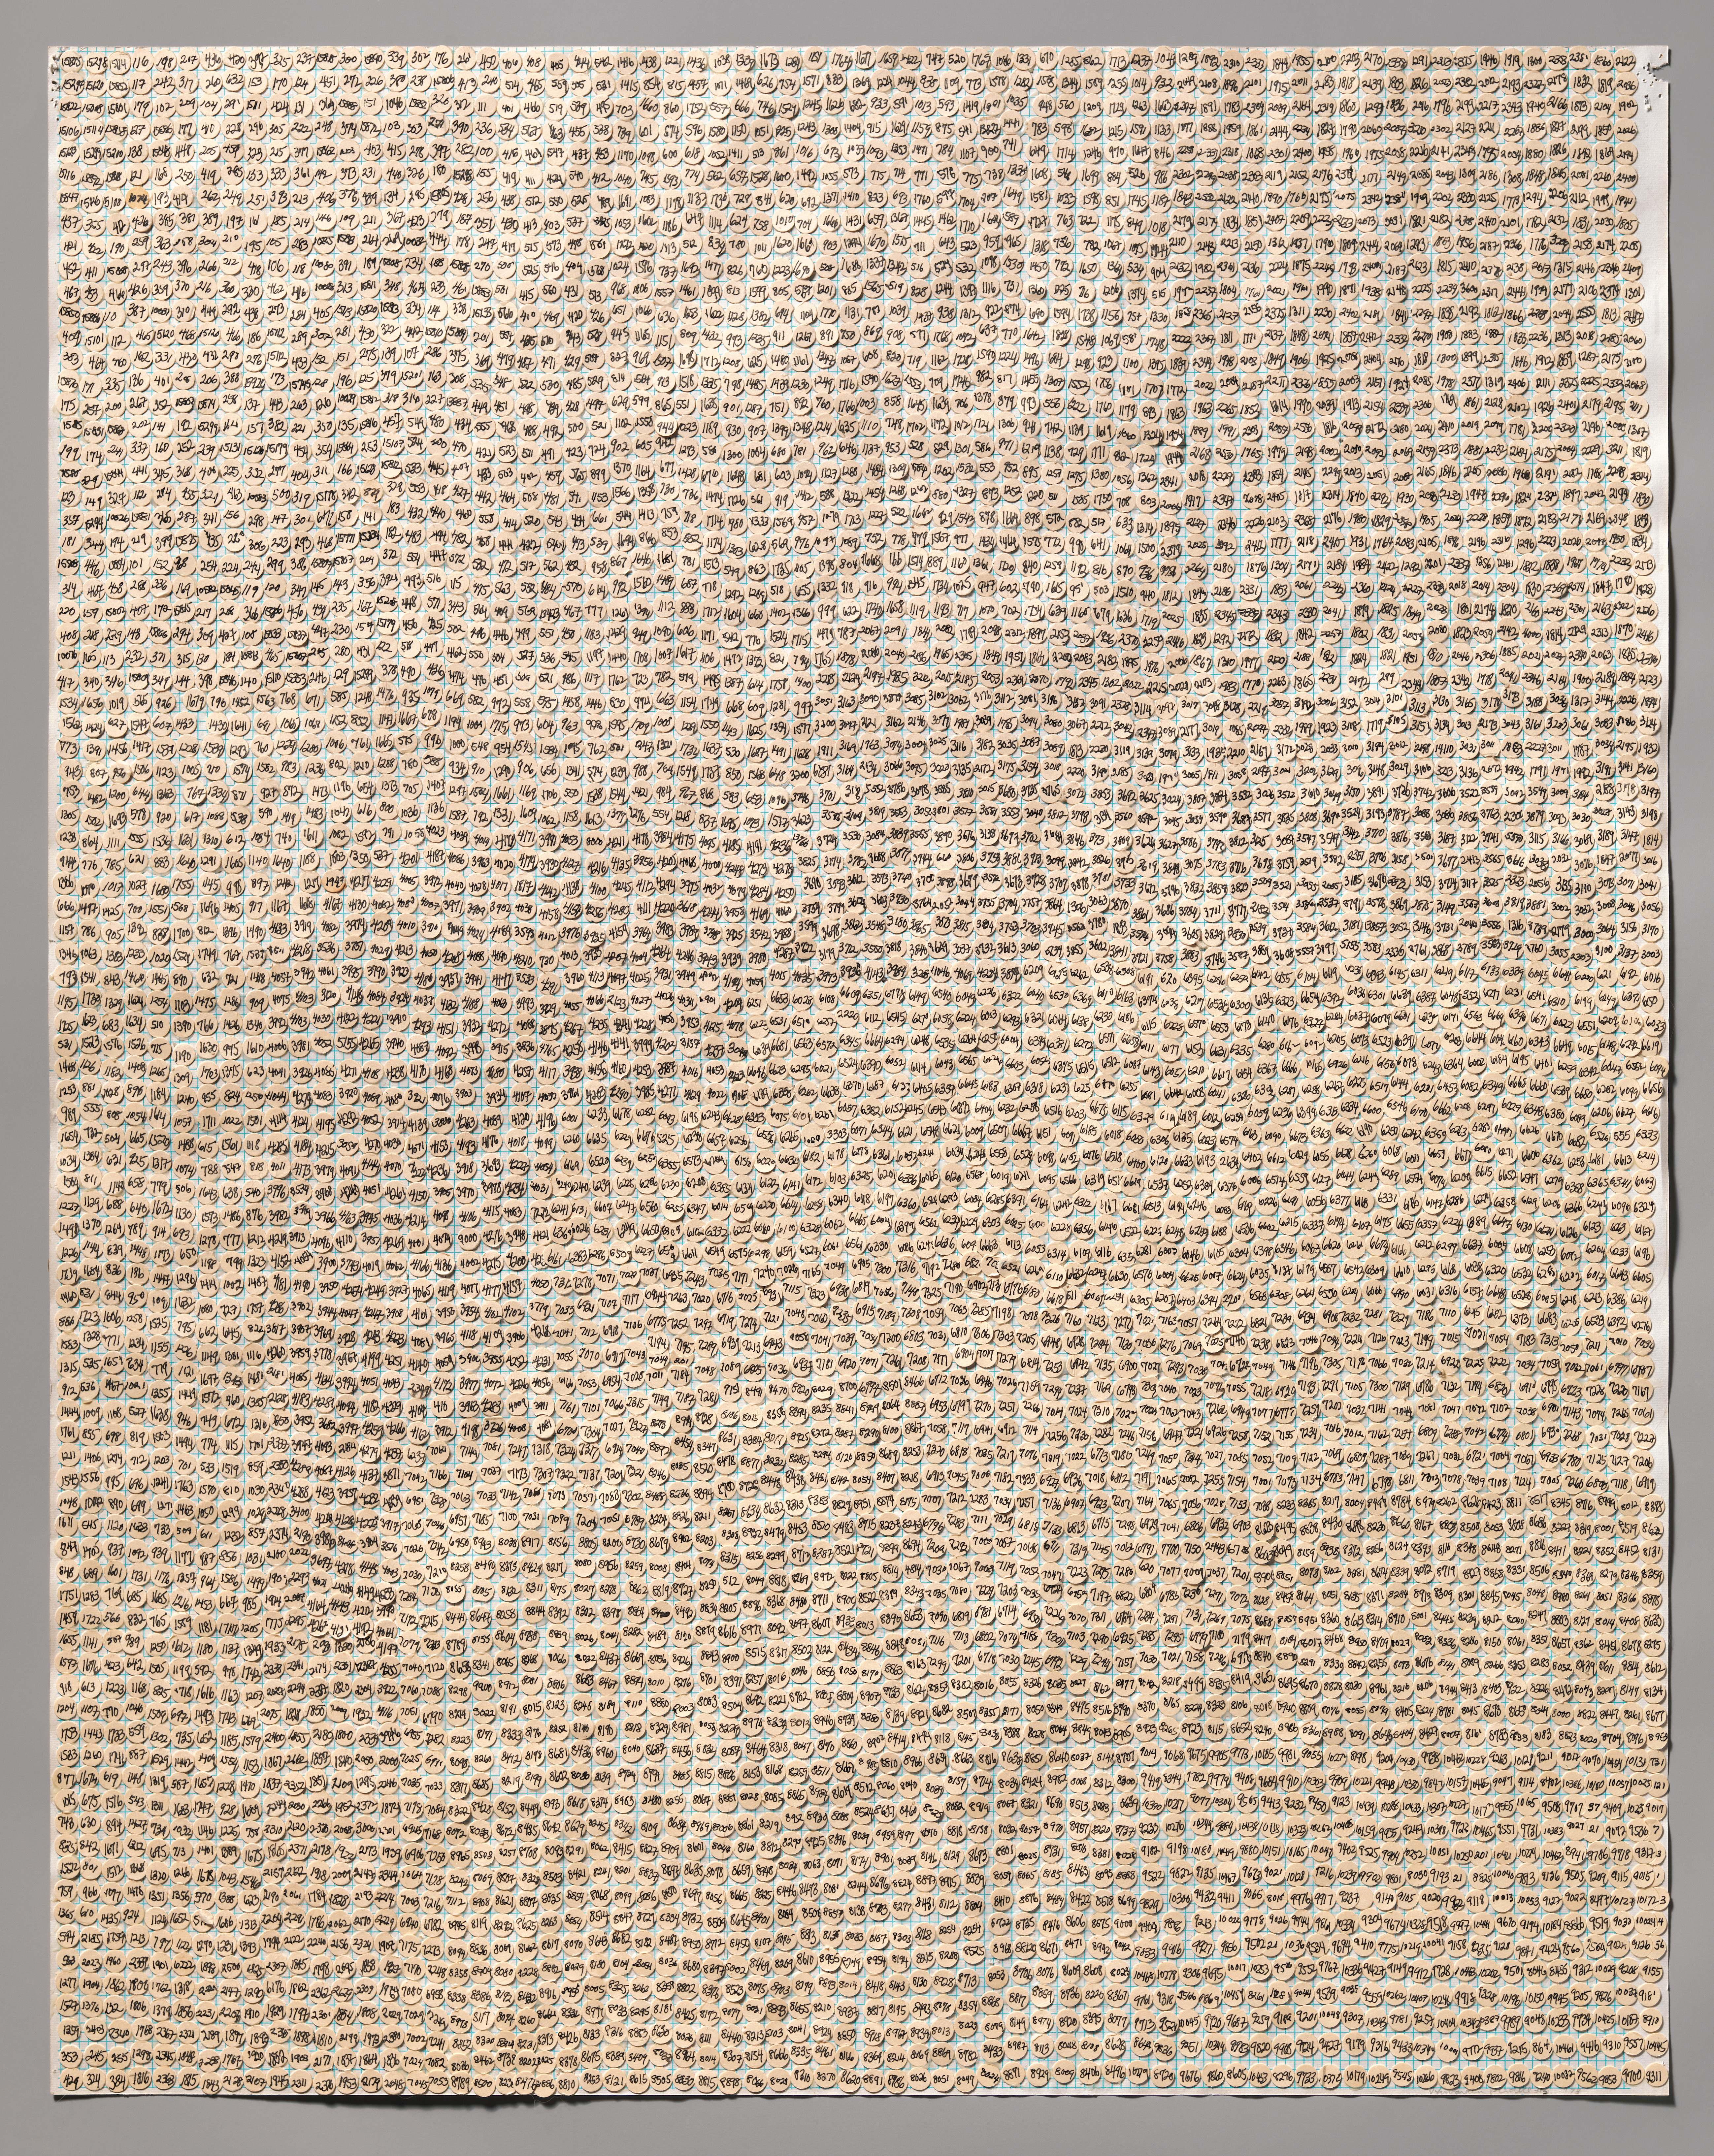 Untitled #2, 1973. Courtesy the artist and Garth Greenan Gallery, New York